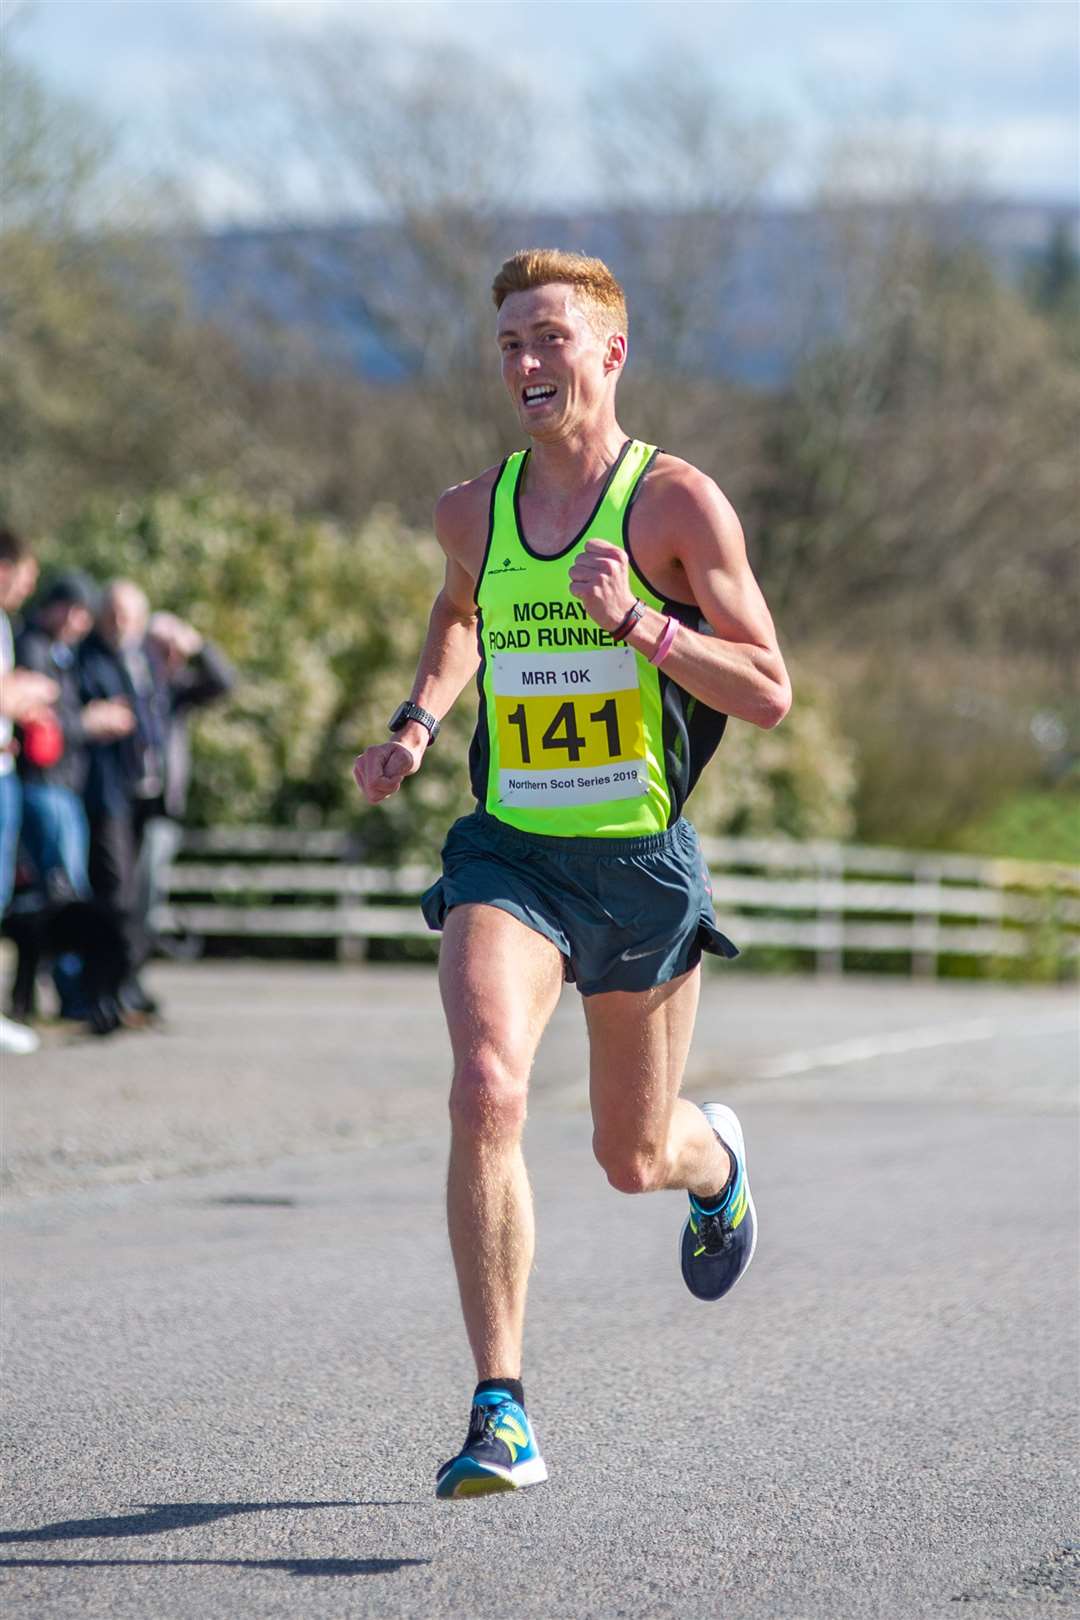 Moray Road Runner Kenny Wilson will return to UHI to defend his Campus 5k title. Picture: Daniel Forsyth. Image No.043617